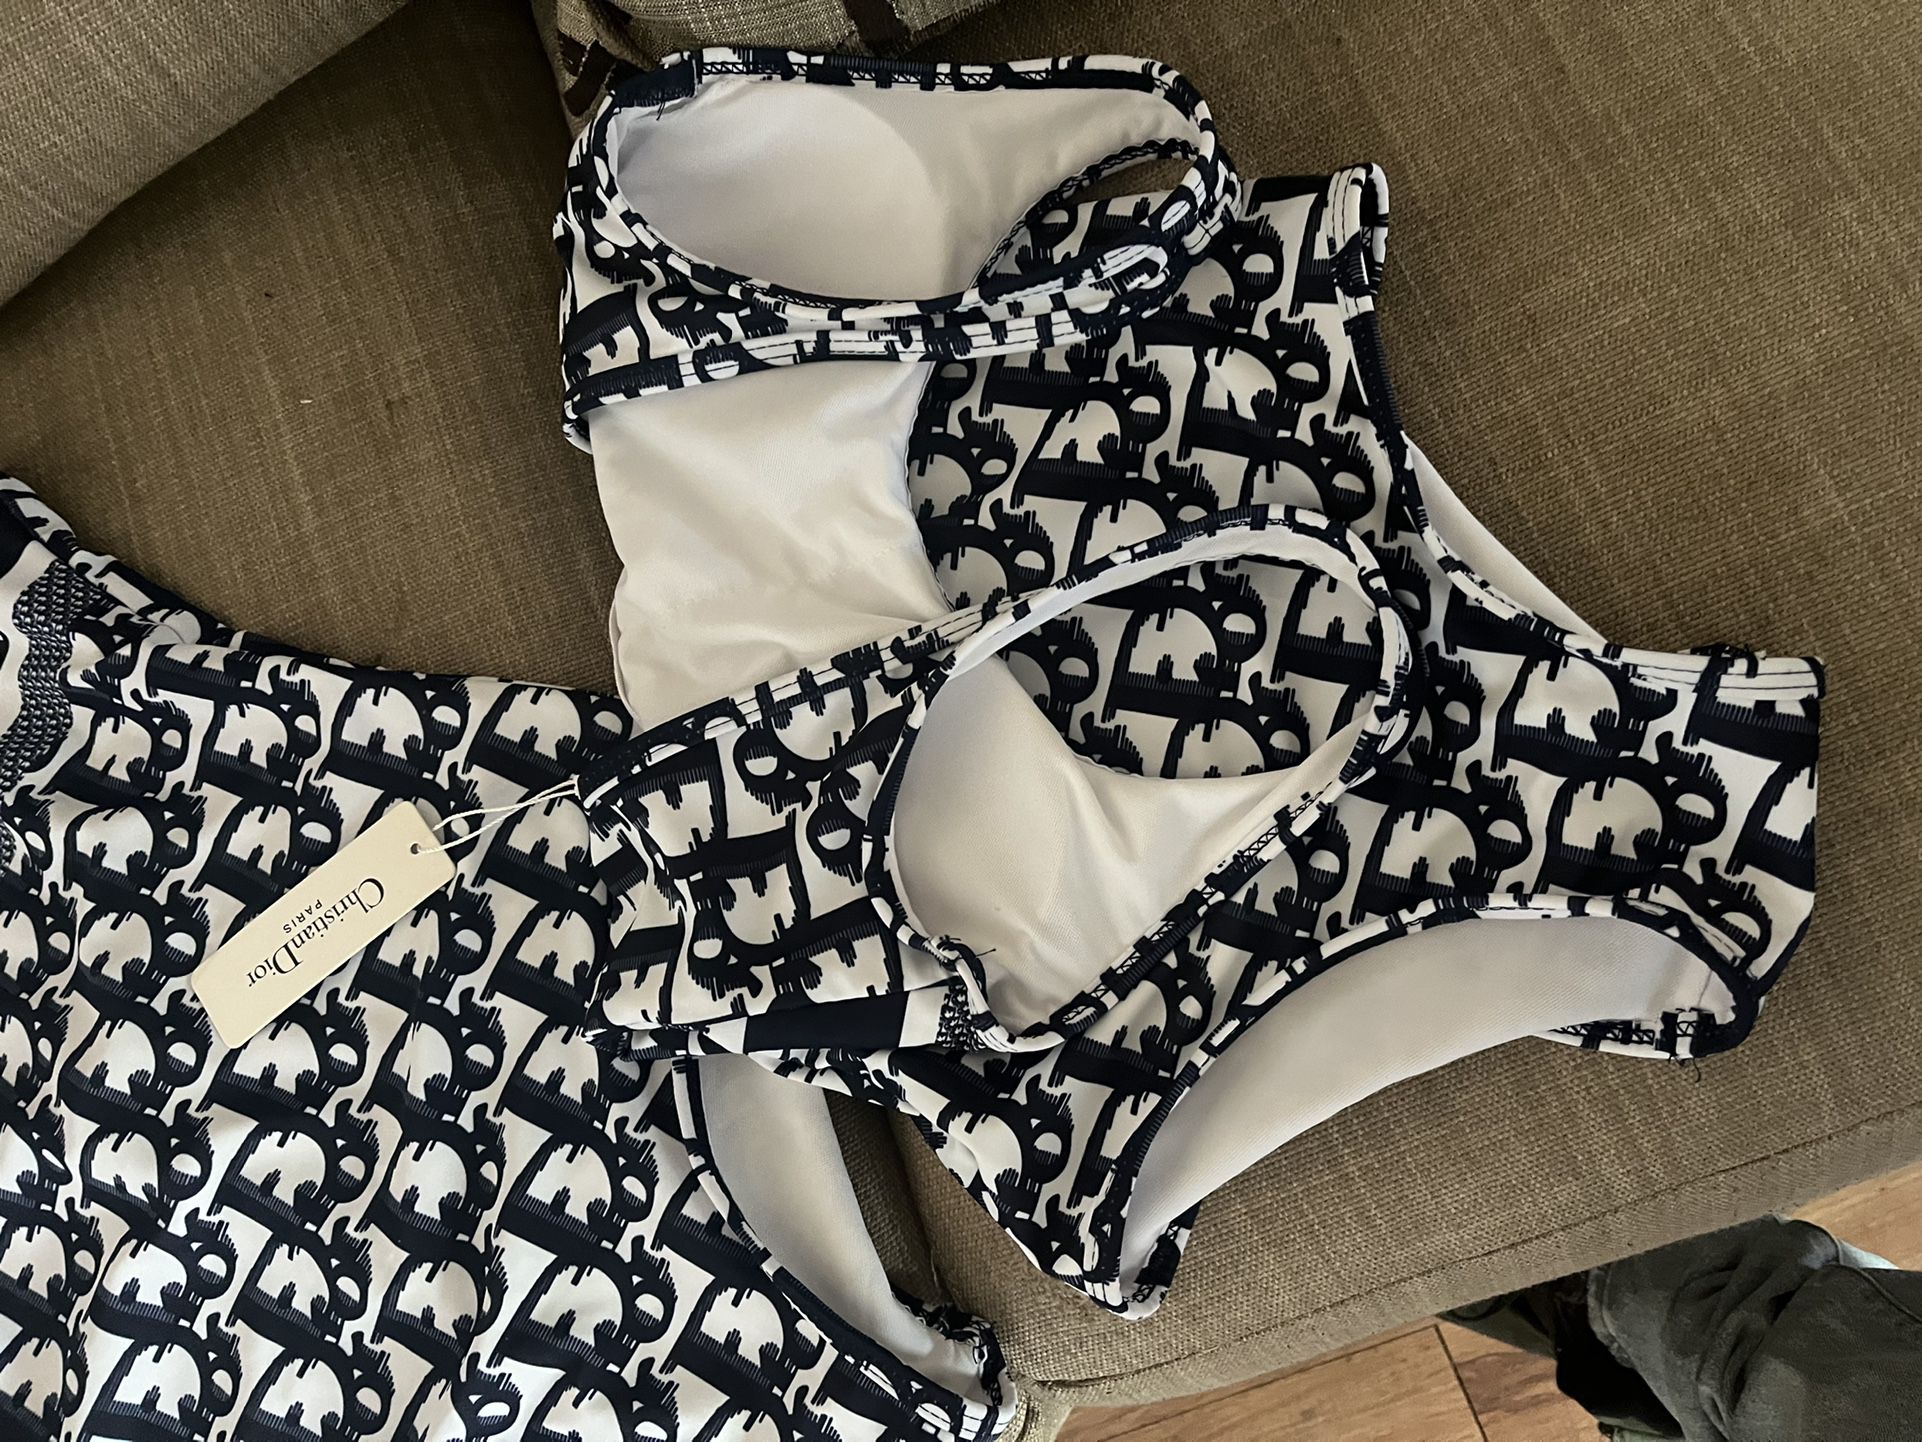 christian dior bathing suit Two piece for Sale in Decatur, GA - OfferUp